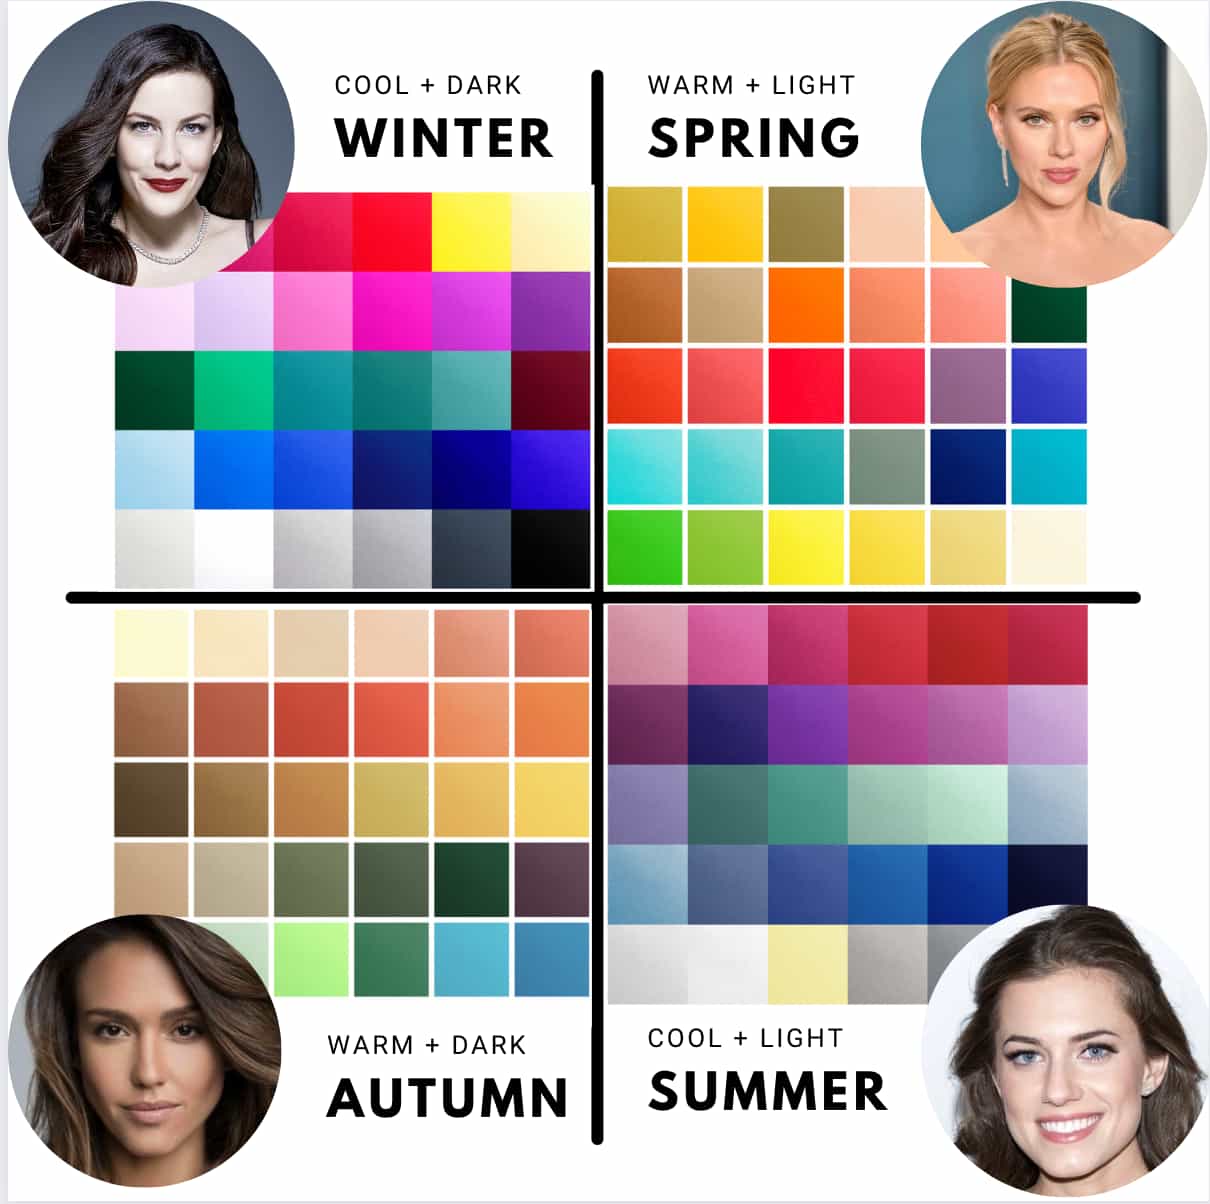 Summer colour analysis: subgroups and colours - THE STYLEFUL